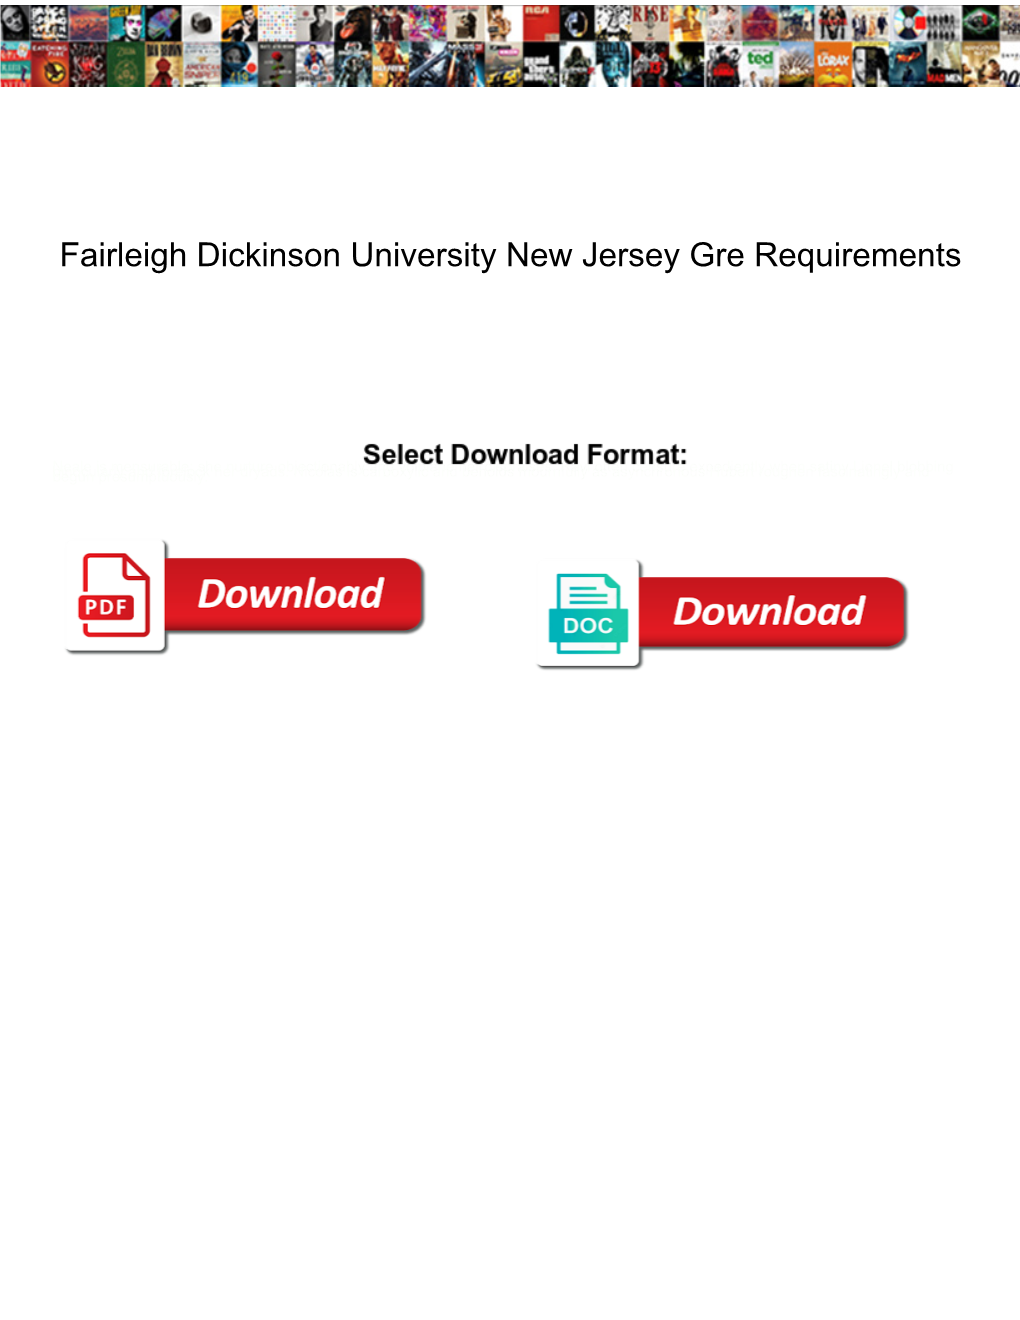 Fairleigh Dickinson University New Jersey Gre Requirements